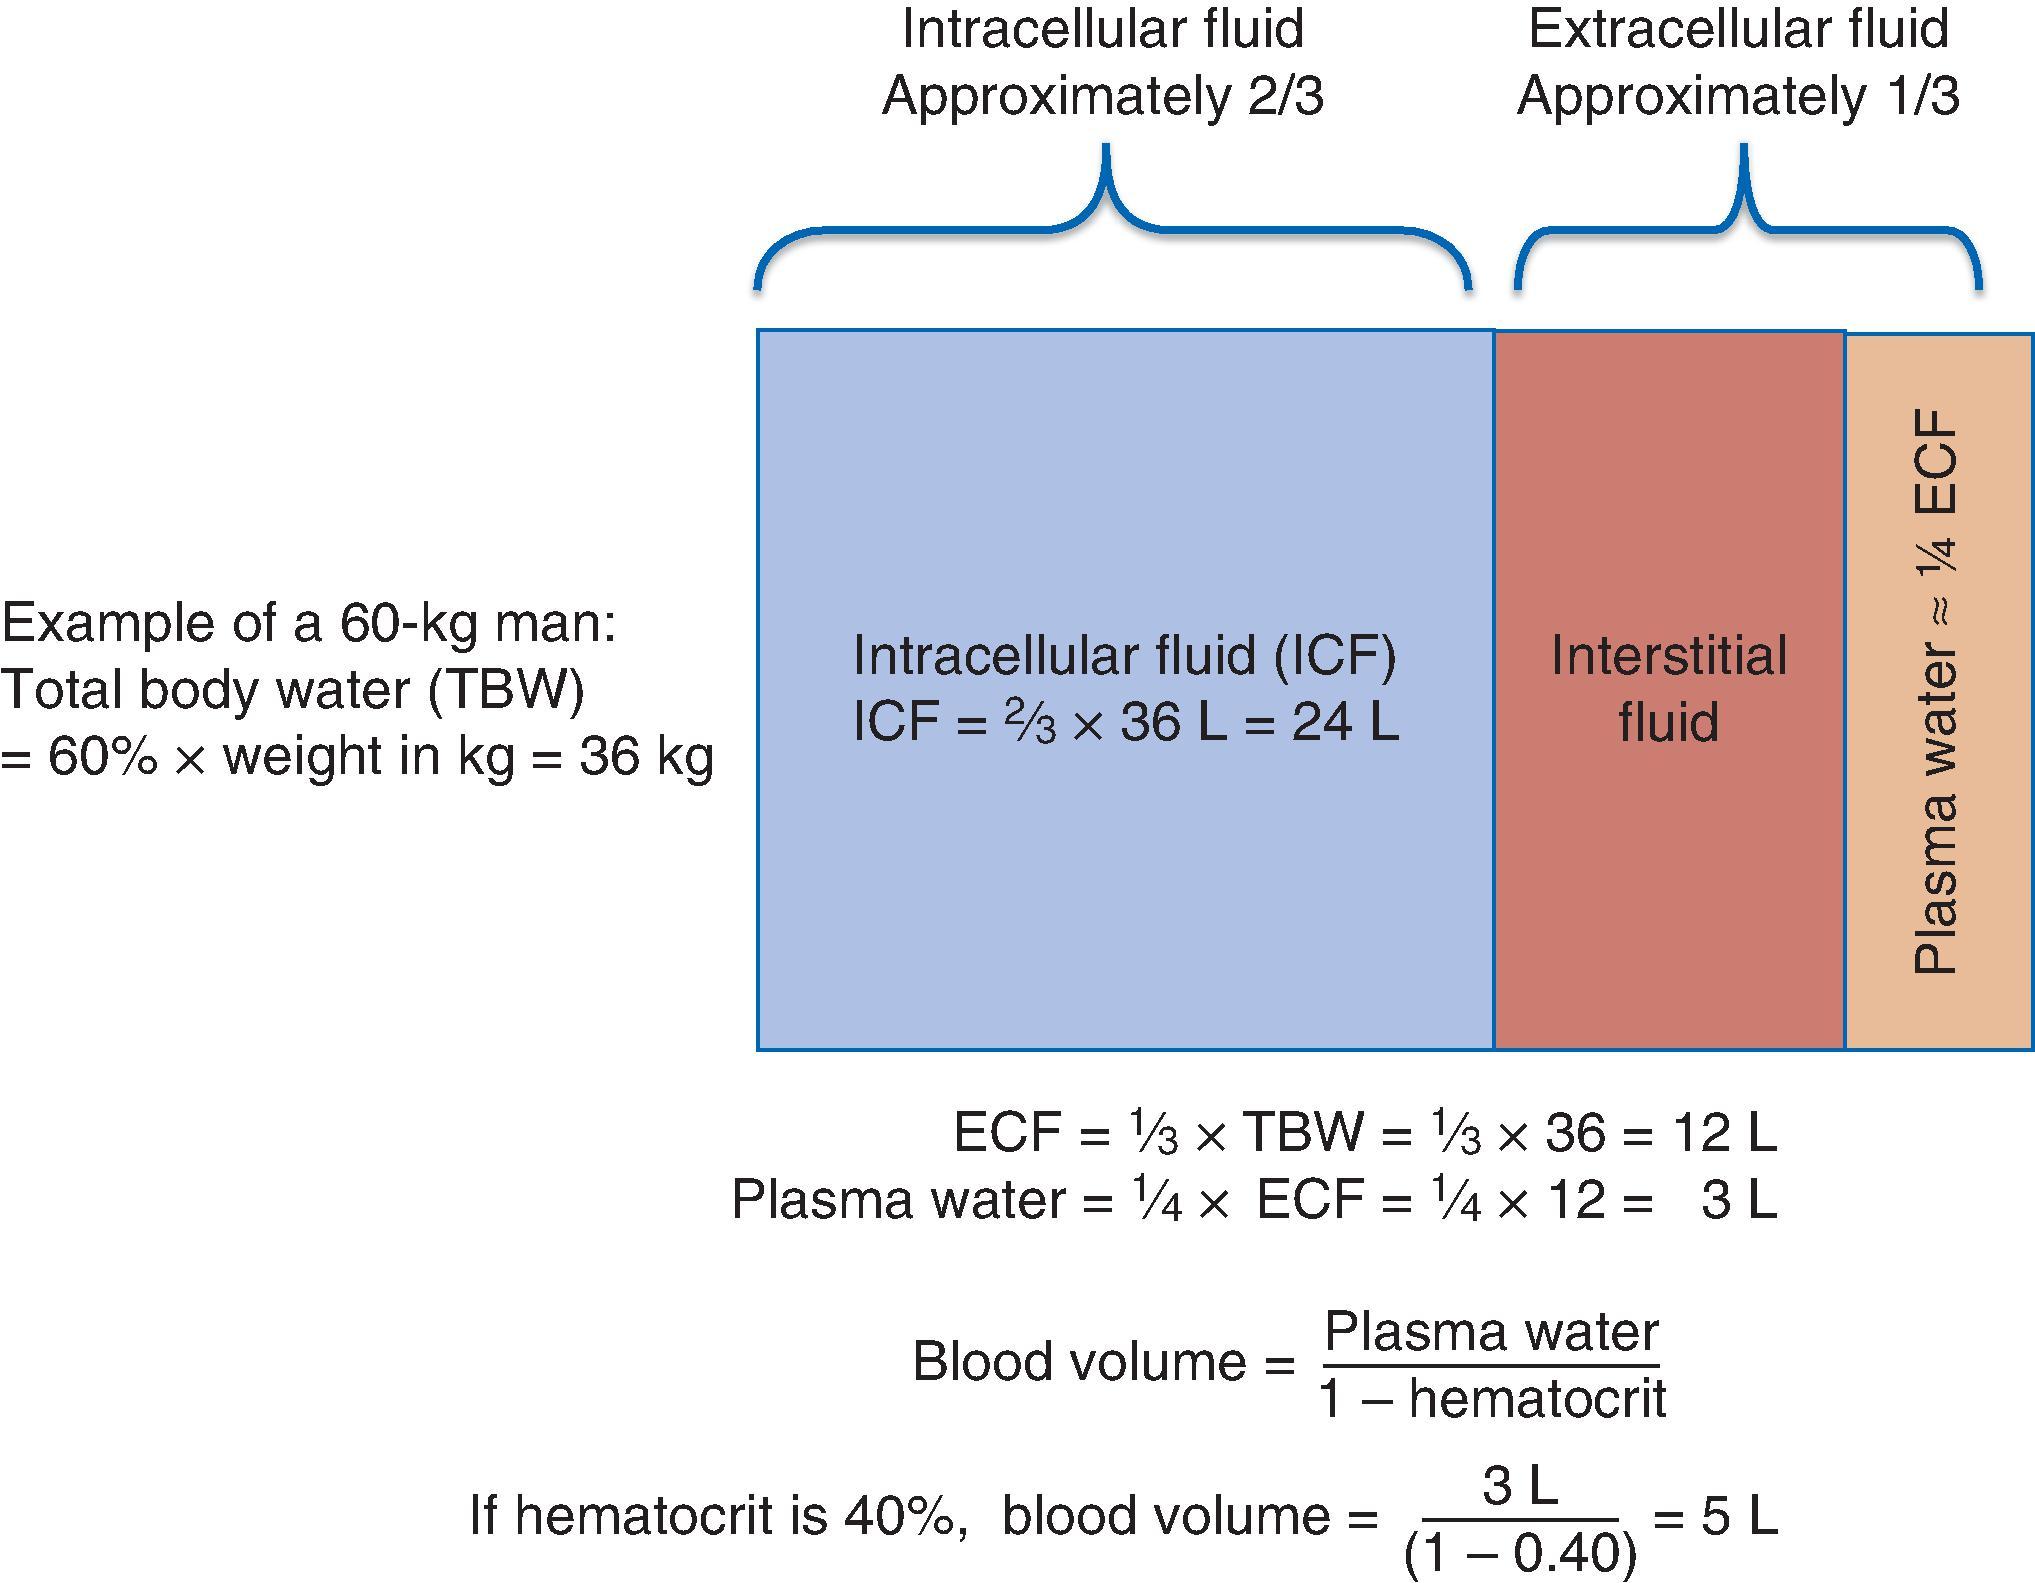 Fig. 1.1, Body fluid compartments, distribution of water, and estimates of compartment volumes.